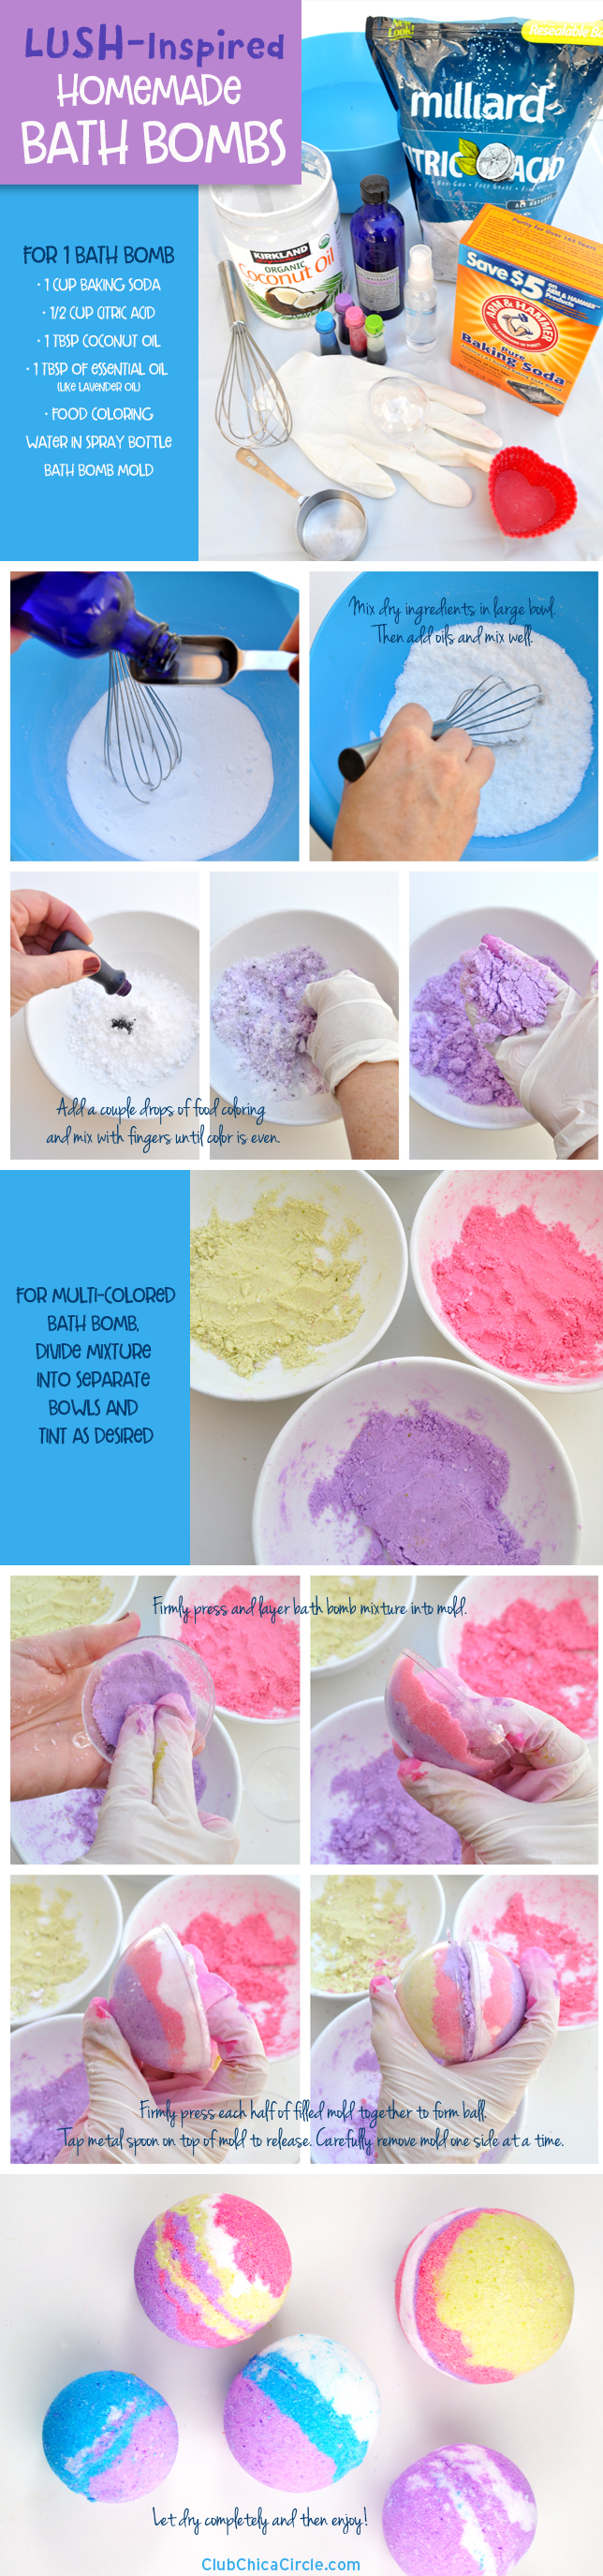 How to Make Bath Bombs - Recipes and Instructions for Homemade Bath Bombs